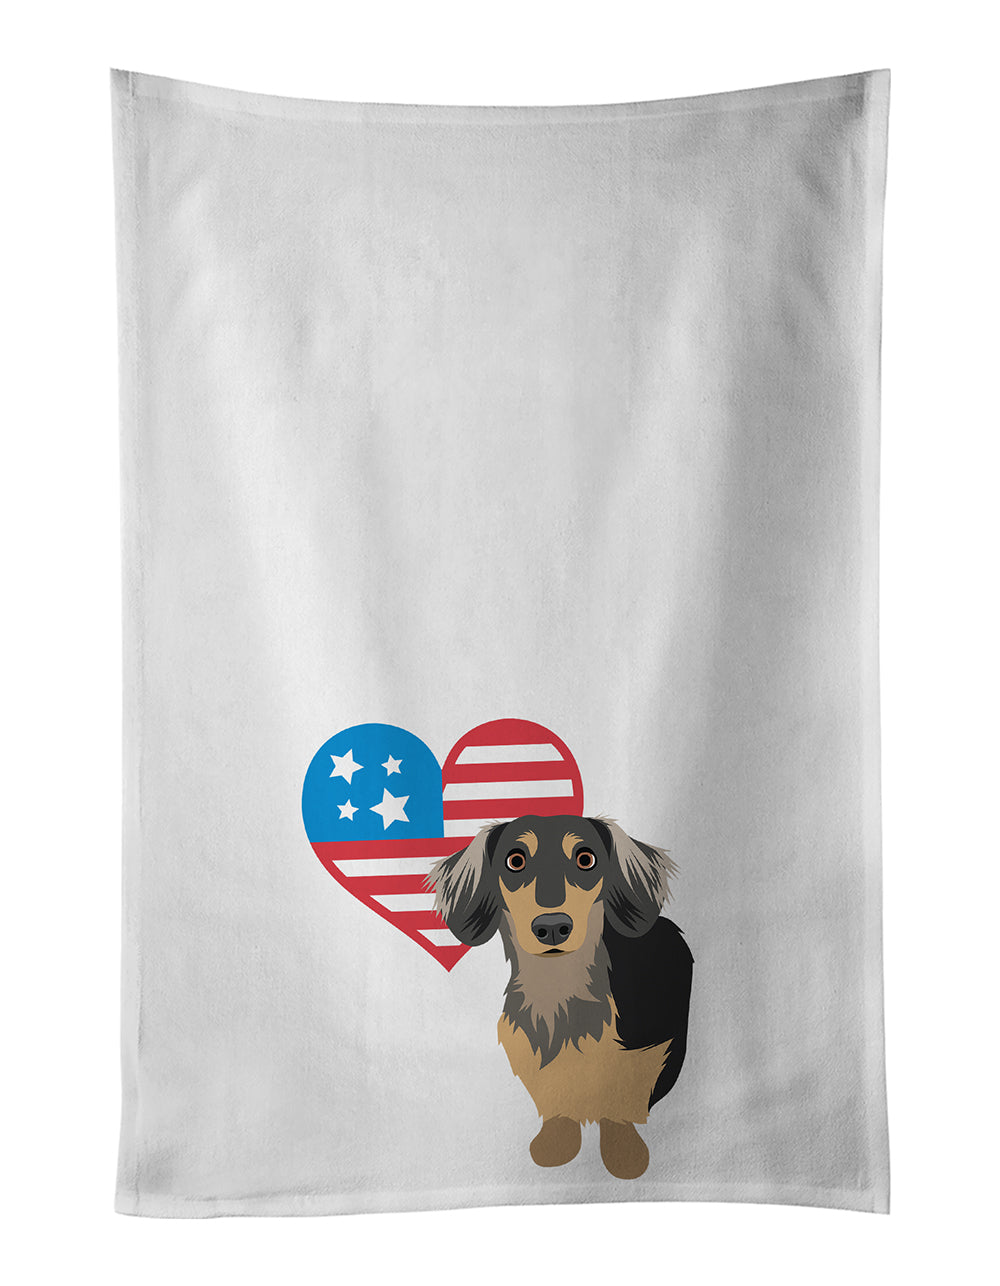 Buy this Dachshund Black and Tan #4 Patriotic White Kitchen Towel Set of 2